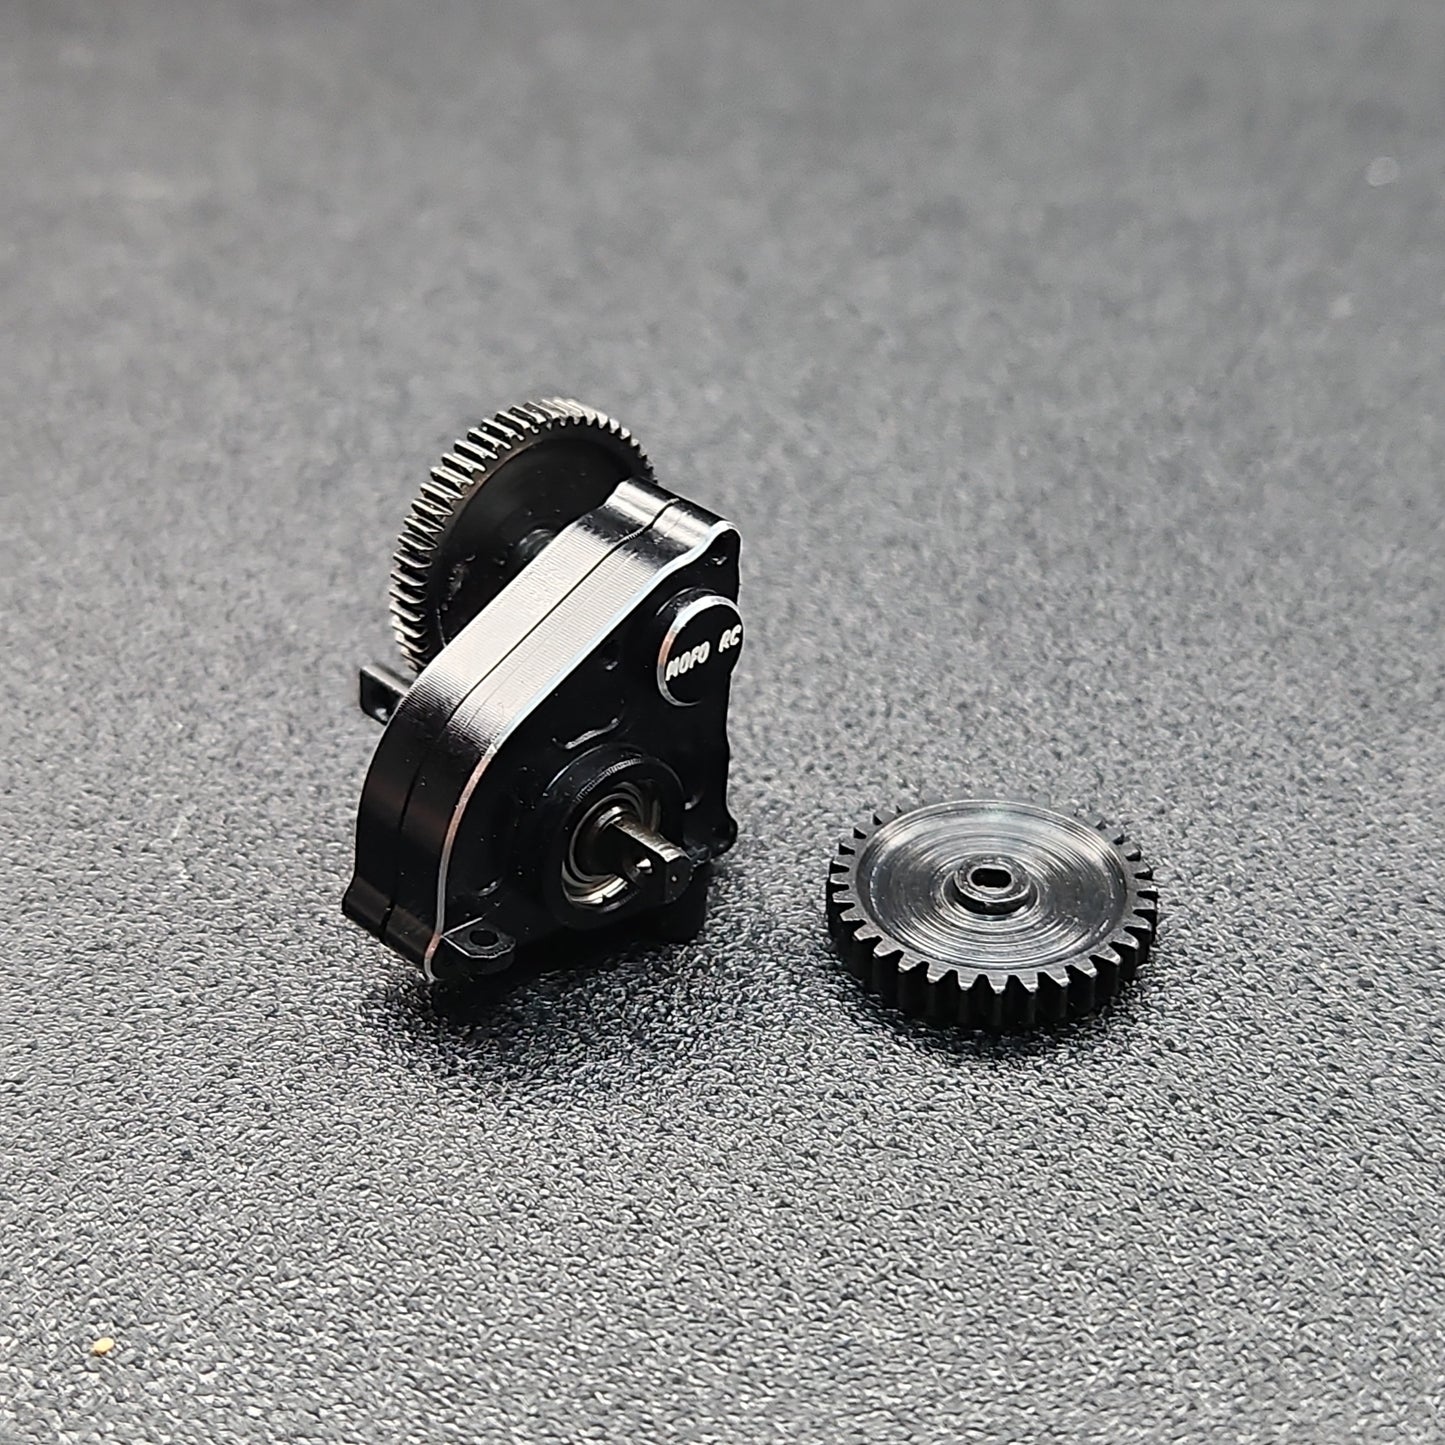 Aluminum Bullet Proof Transmission Complete Pre-Built mod.3 and mod.5 For Axial SCX24 / AX24